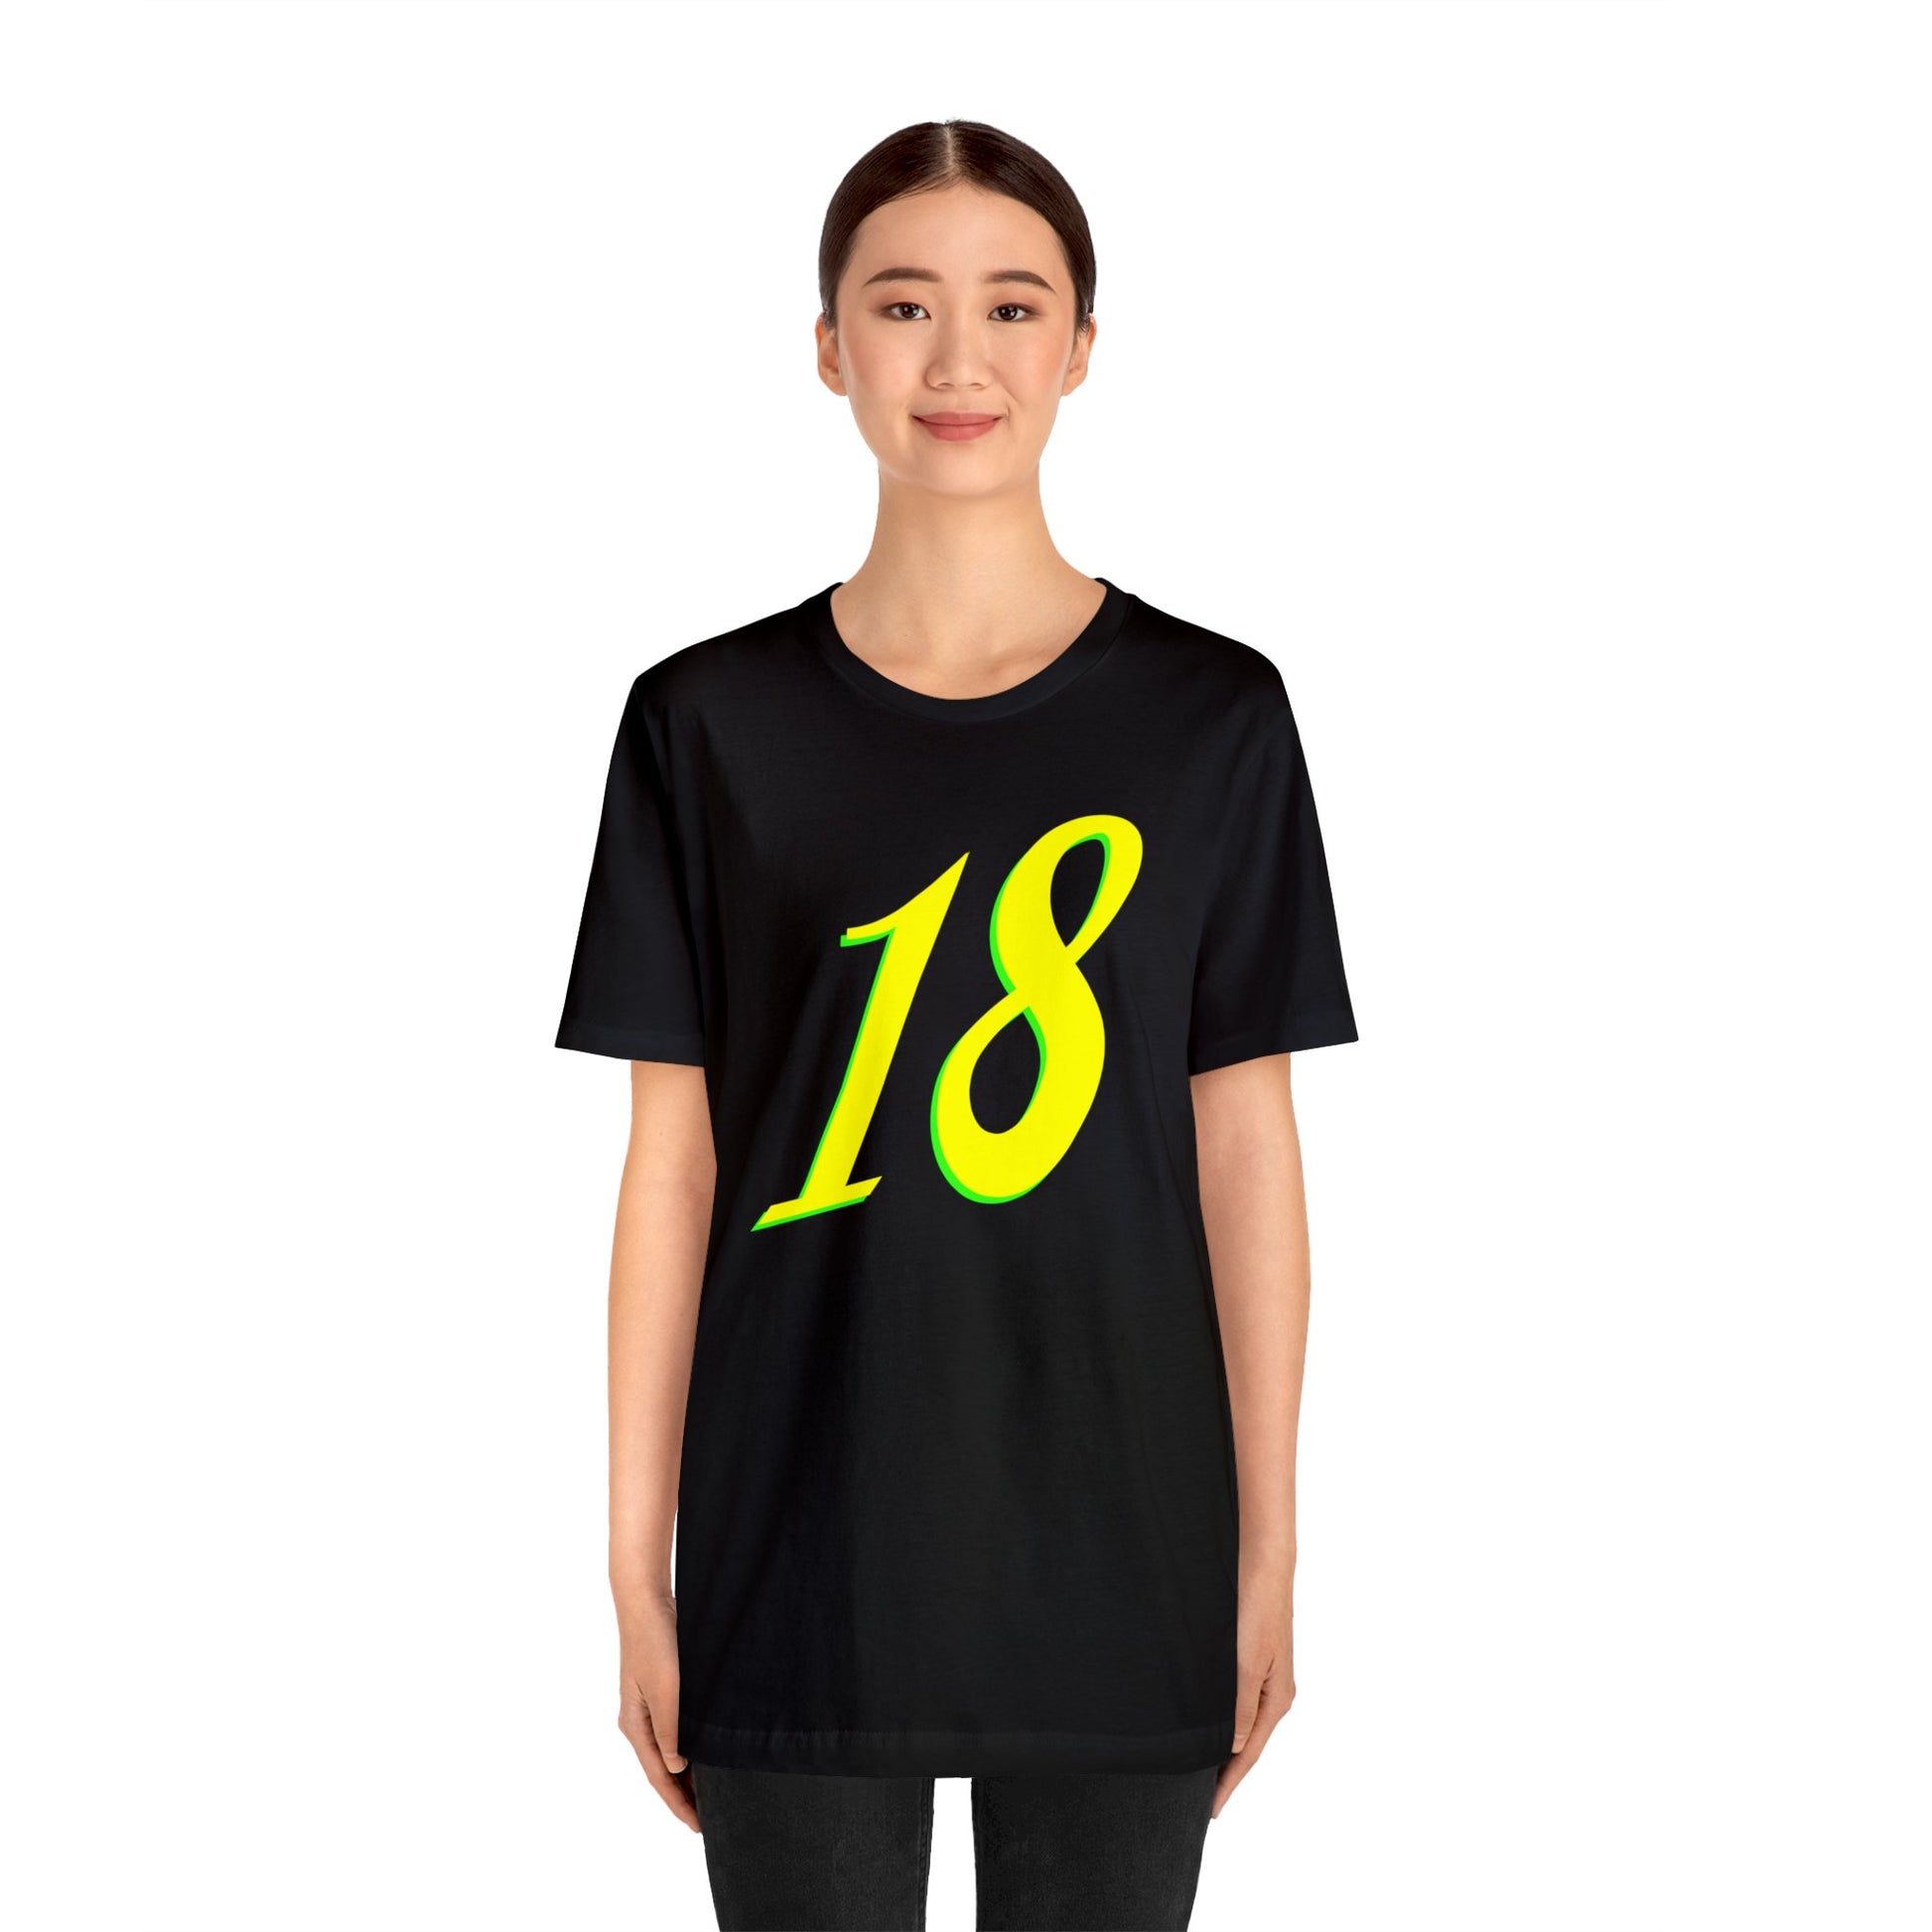 Number 18 Design - Soft Cotton Tee for birthdays and celebrations, Gift for friends and family, Multiple Options by clothezy.com in Asphalt Size Medium - Buy Now